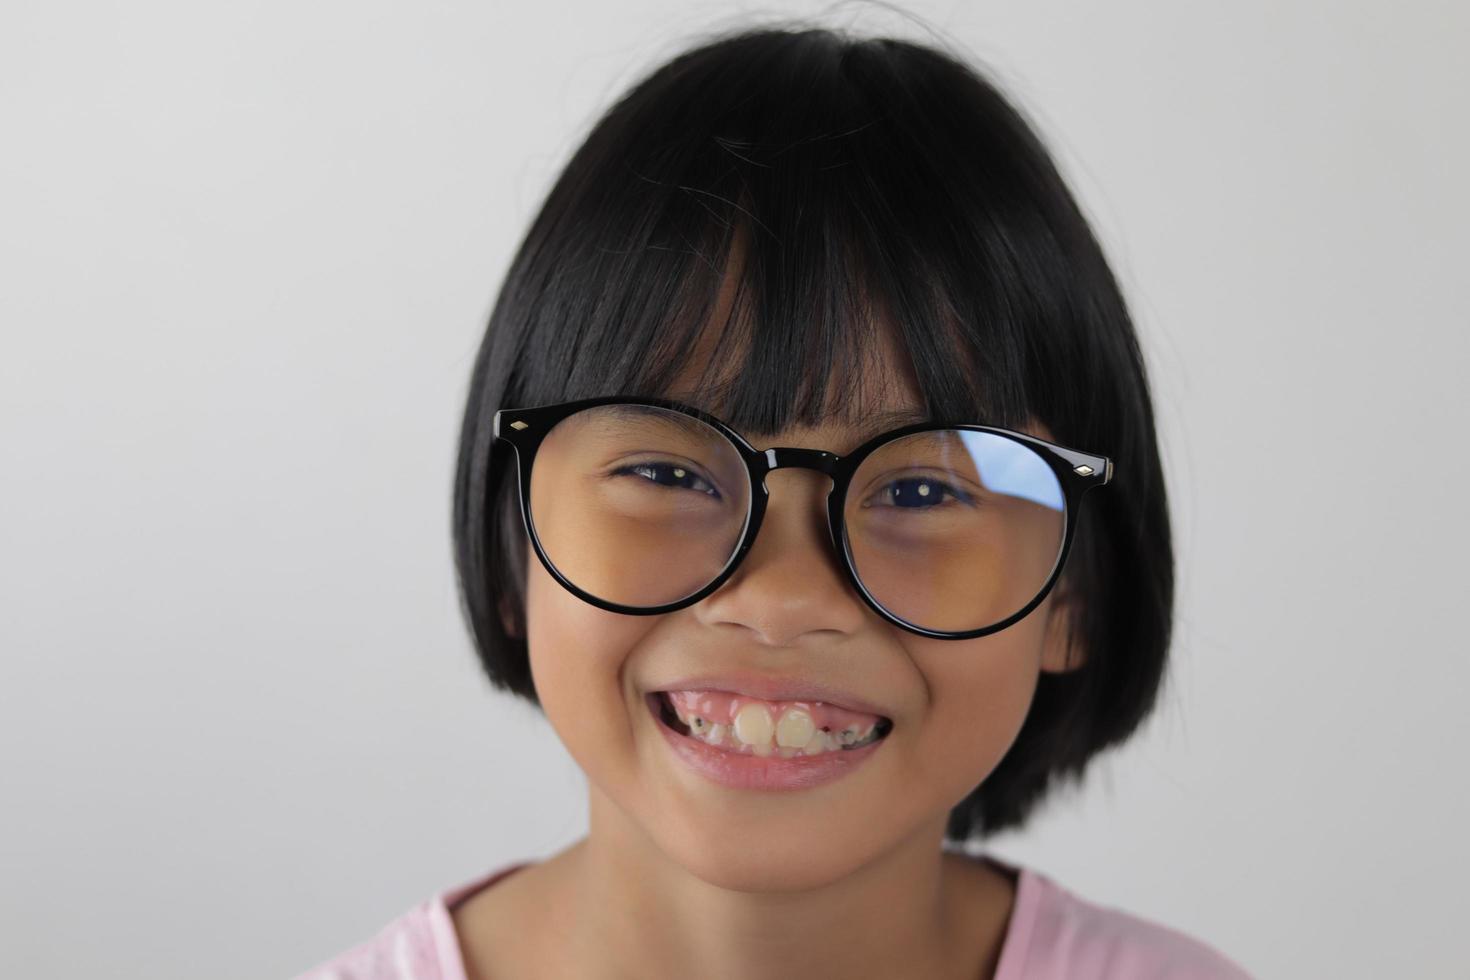 Portrait of child wearing eyeglasses with blur background photo